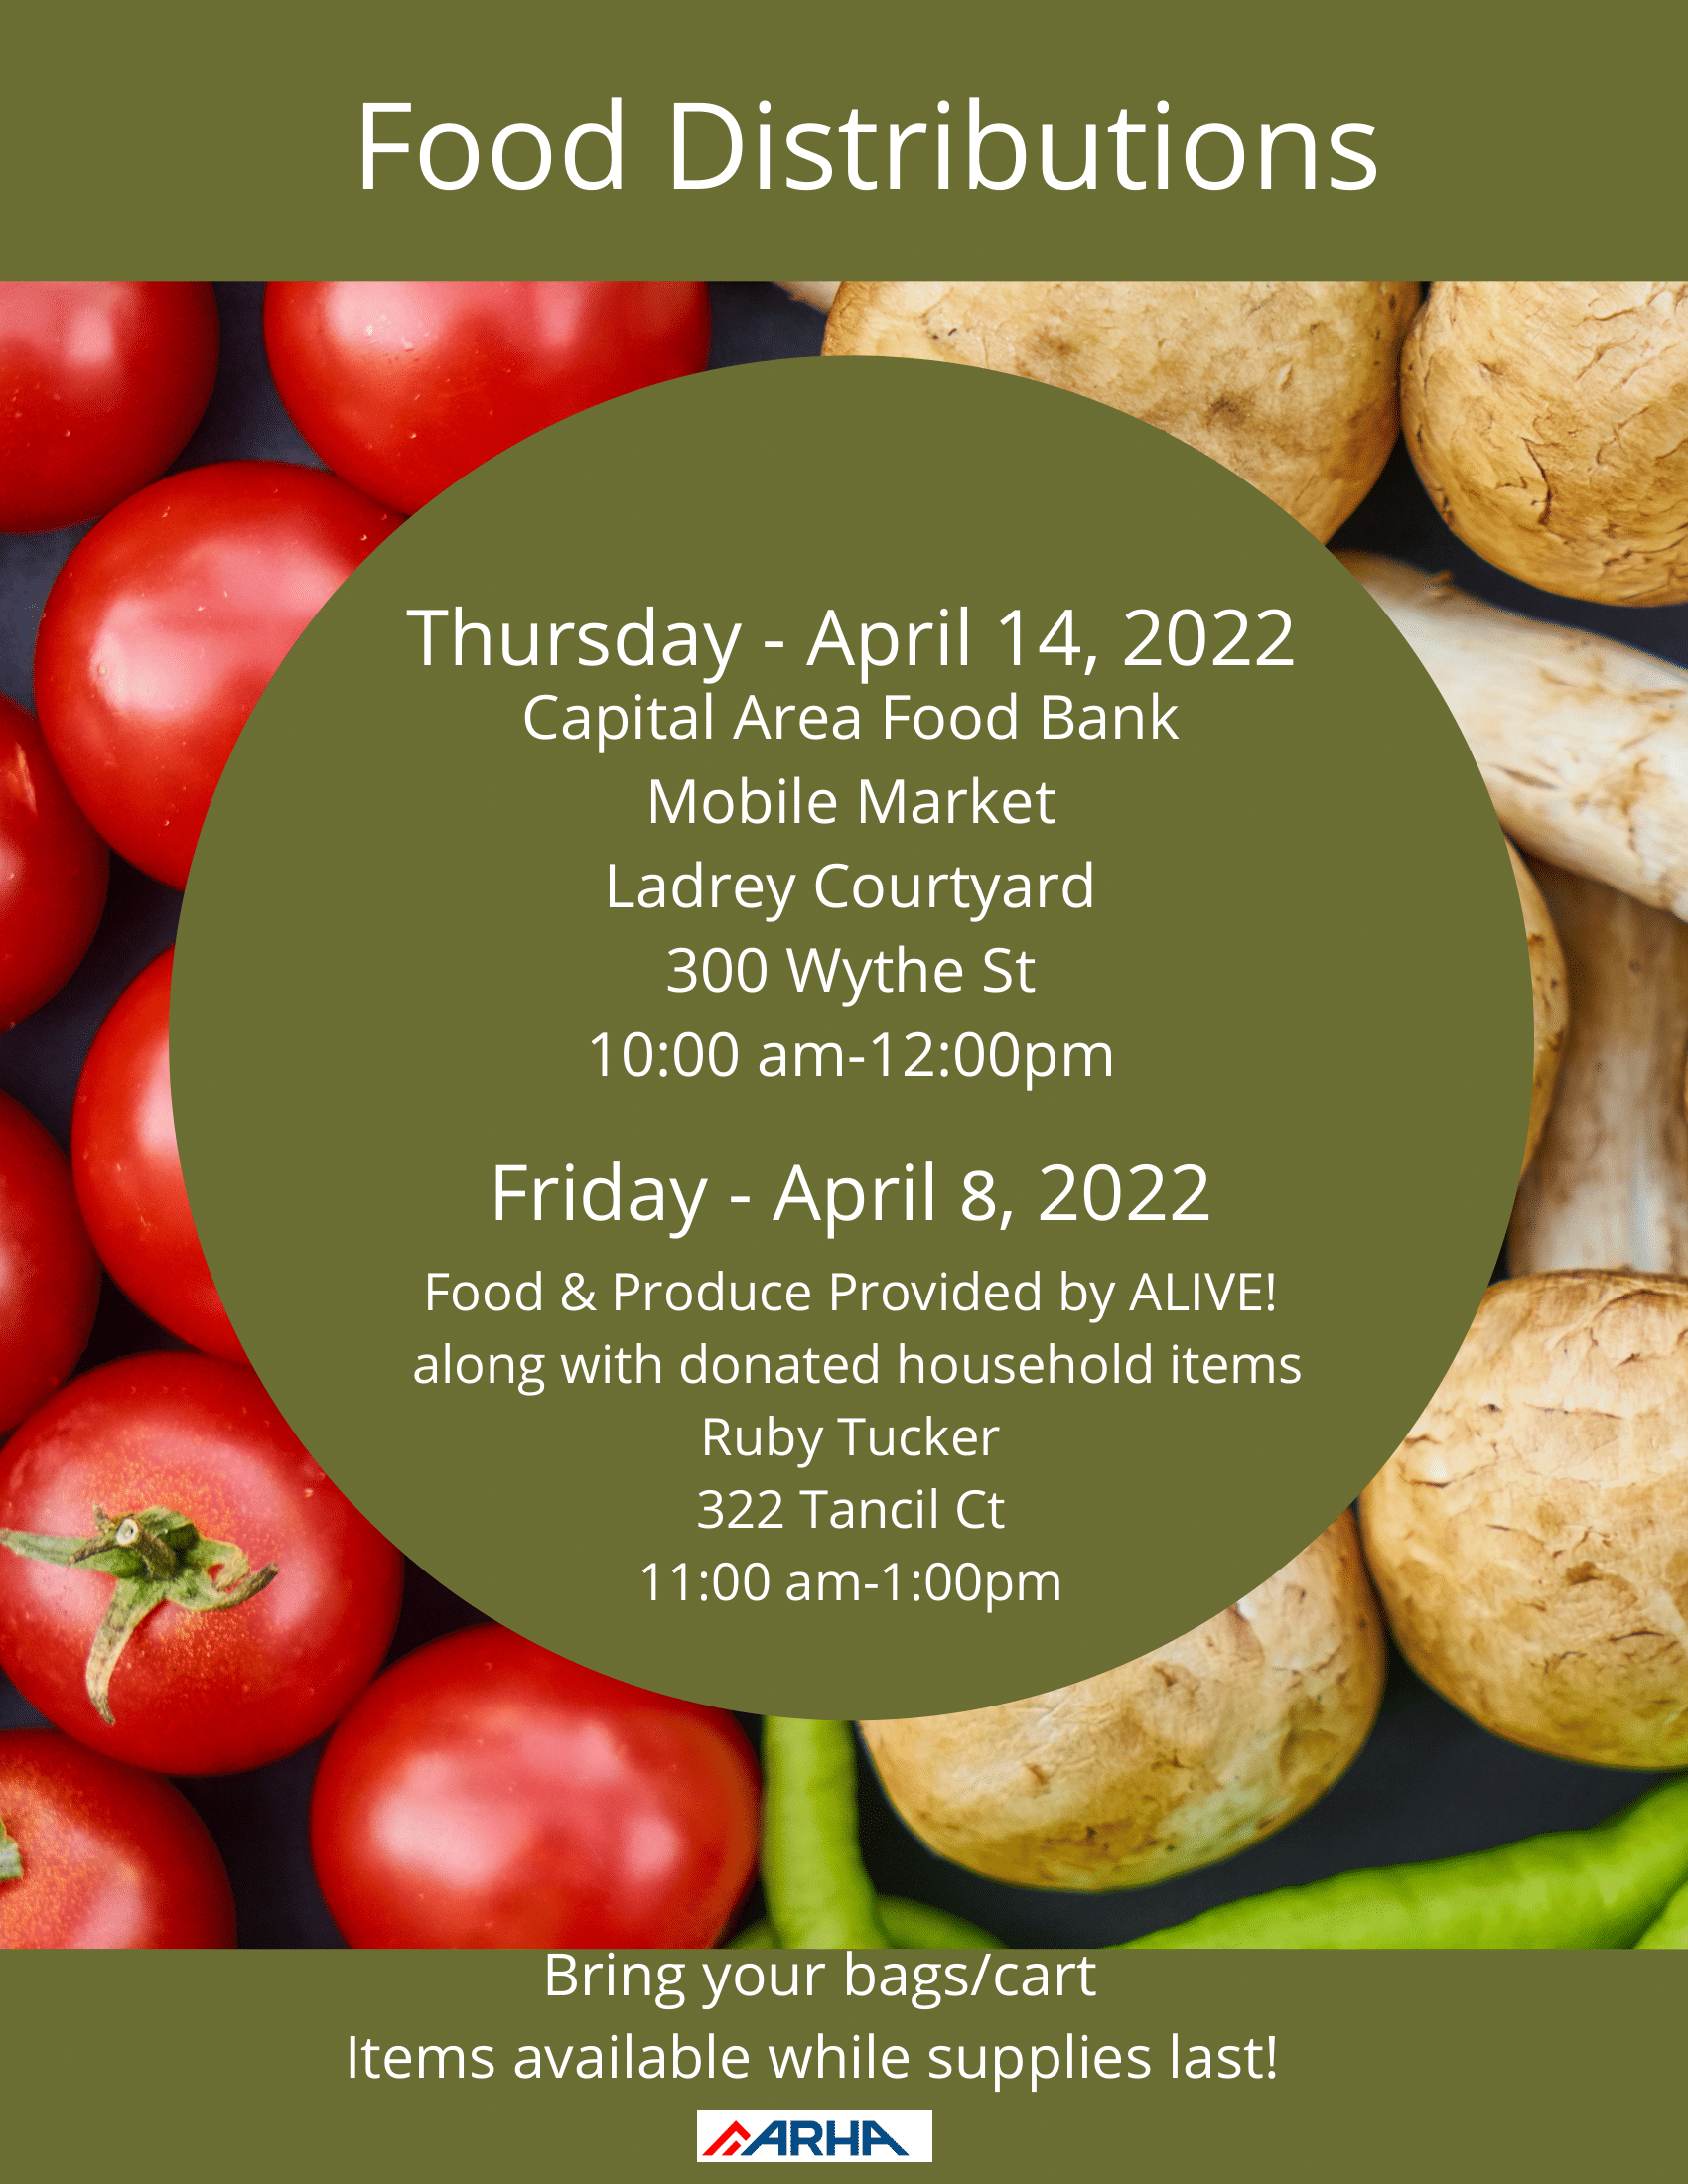 flyer for two food distribution sites: April 8th at Ruby Tucker from 11 am to 1 pm. The second date is April 14 at the Capital Area Food Bank from 10 am to 12 pm